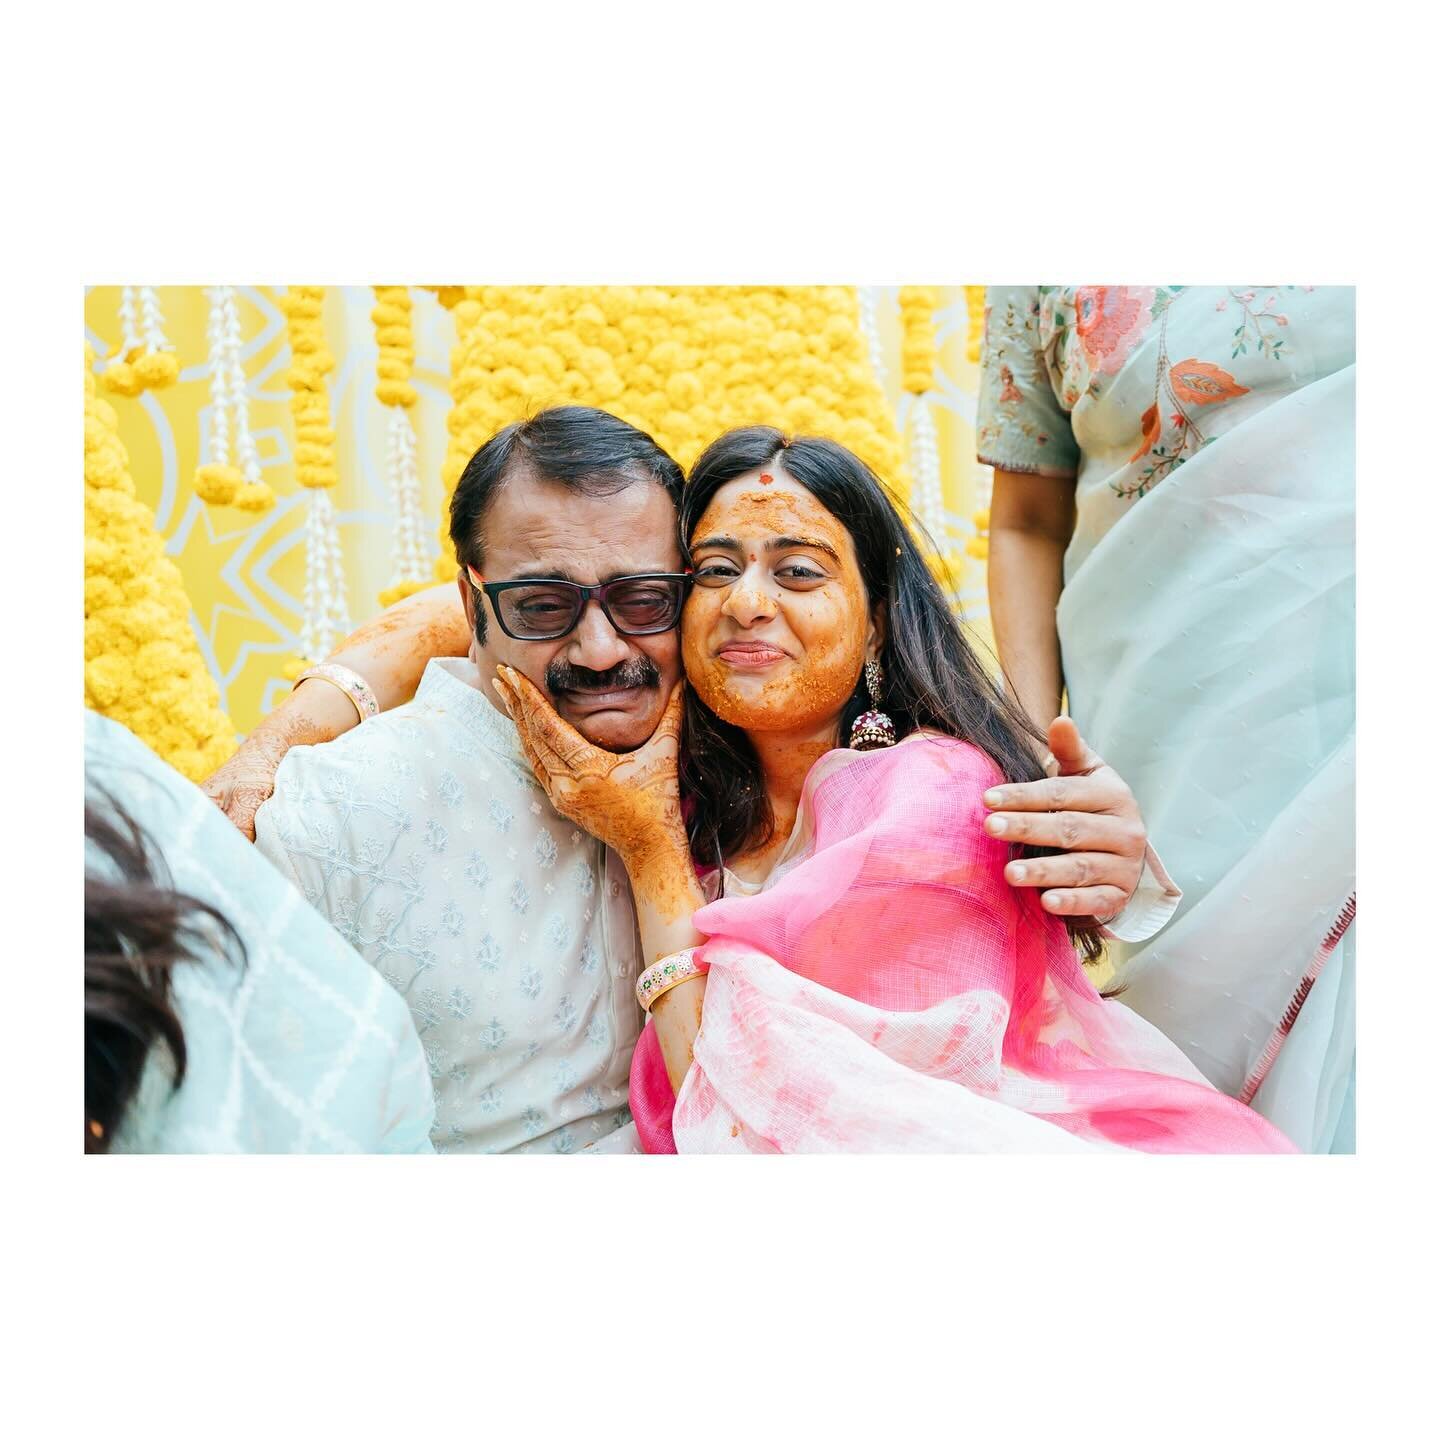 CHETNA &amp; THE FATHER

In a world of filters and poses, there&rsquo;s a magical beauty in capturing life unfiltered and unposed. It&rsquo;s about embracing raw authenticity, where genuine laughter and untamed emotions paint the canvas of our memori